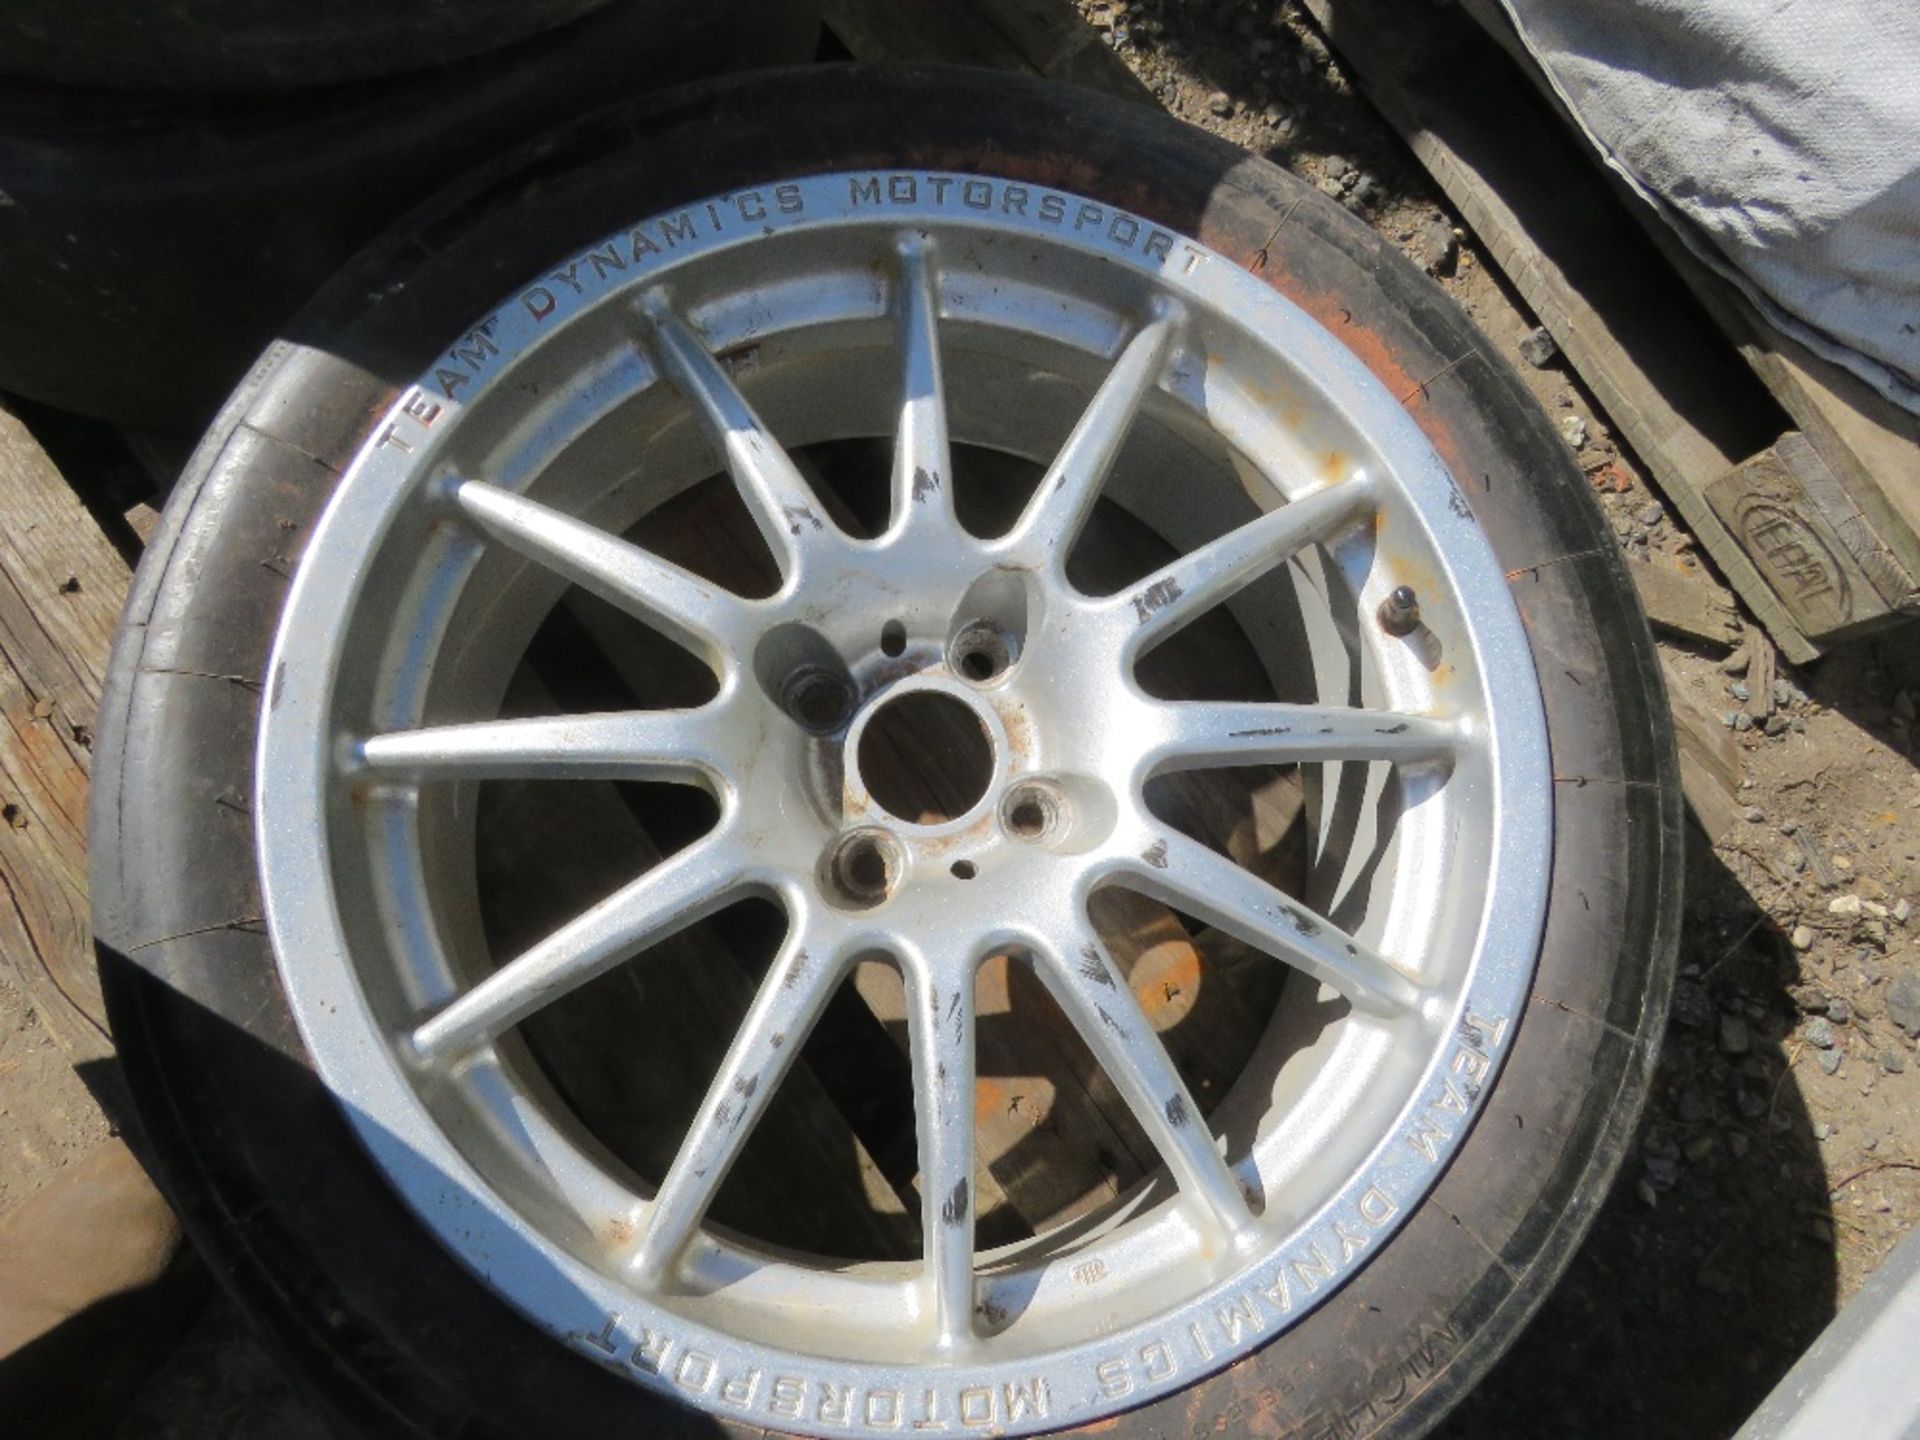 SET OF 4NO TEAM DYNAMICS MOTORSPORT RACING WHEELS AND TYRES, PREVIOUSLY USED ON AN ALFA ROMEO 33 RA - Image 8 of 8